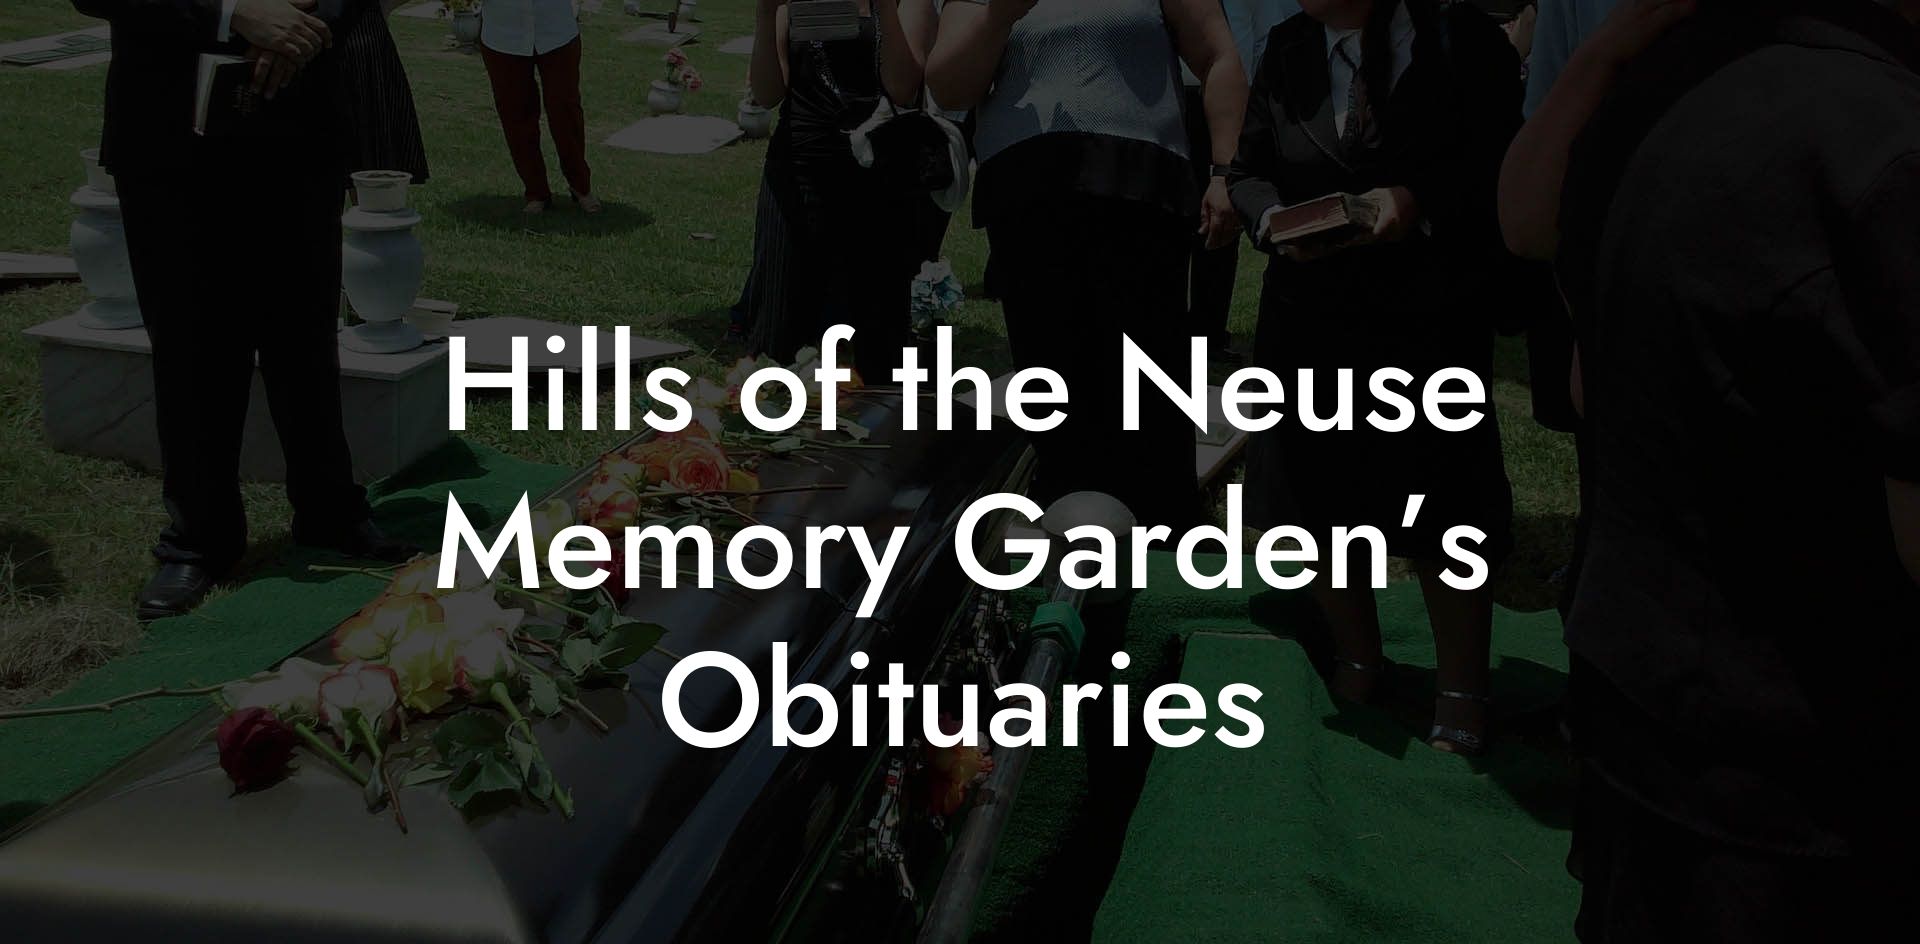 Hills of the Neuse Memory Garden’s Obituaries